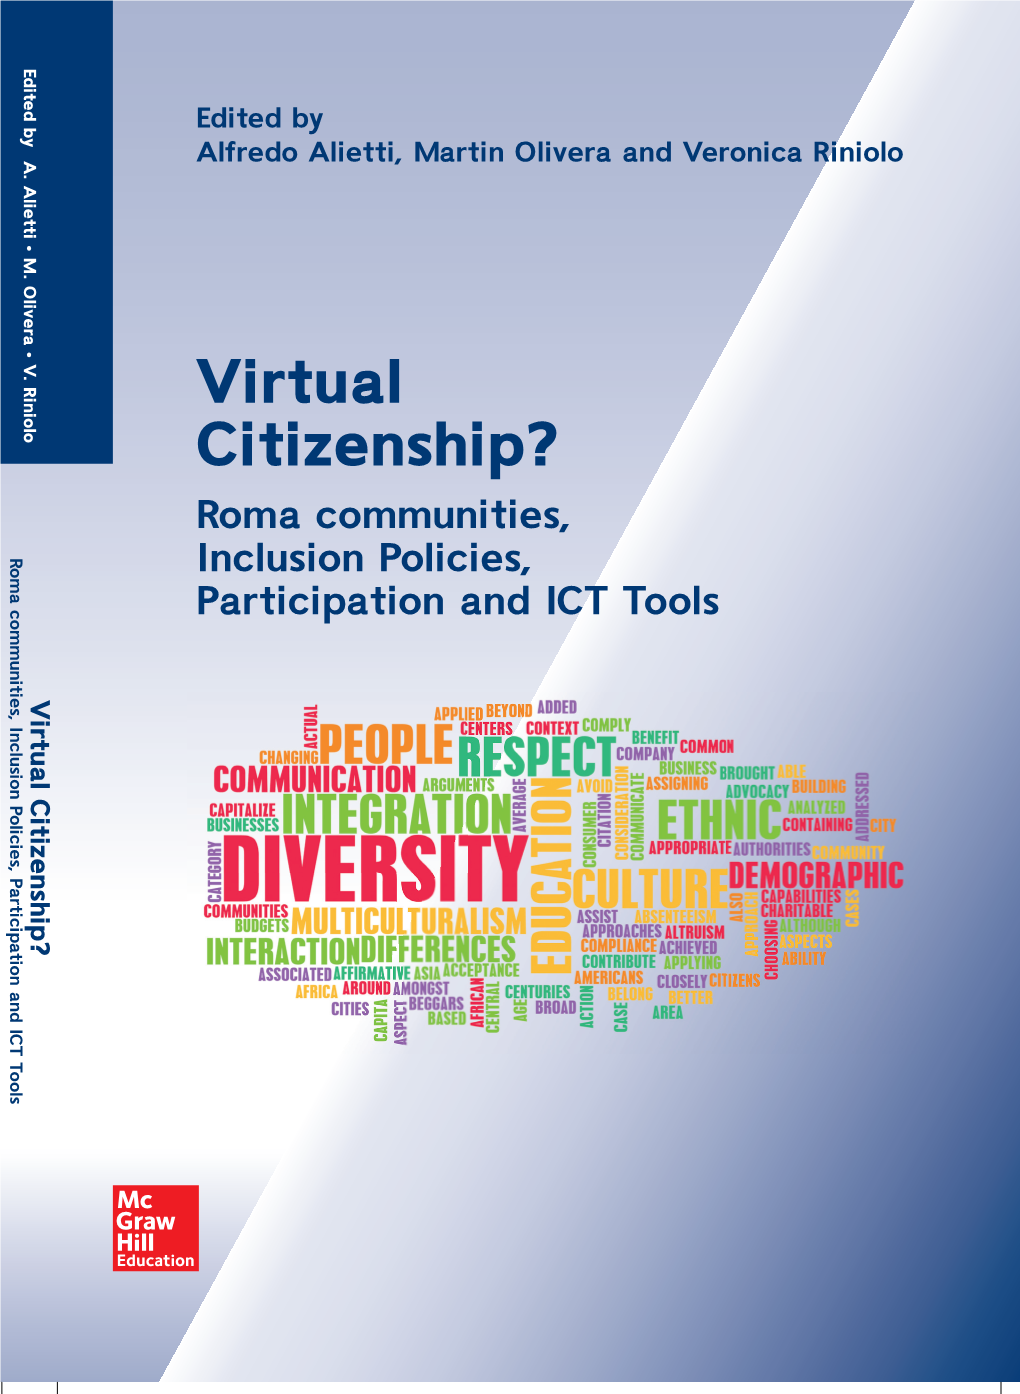 Virtual Citizenship? Roma Communities, Inclusion Policies, Participation and ICT Tools